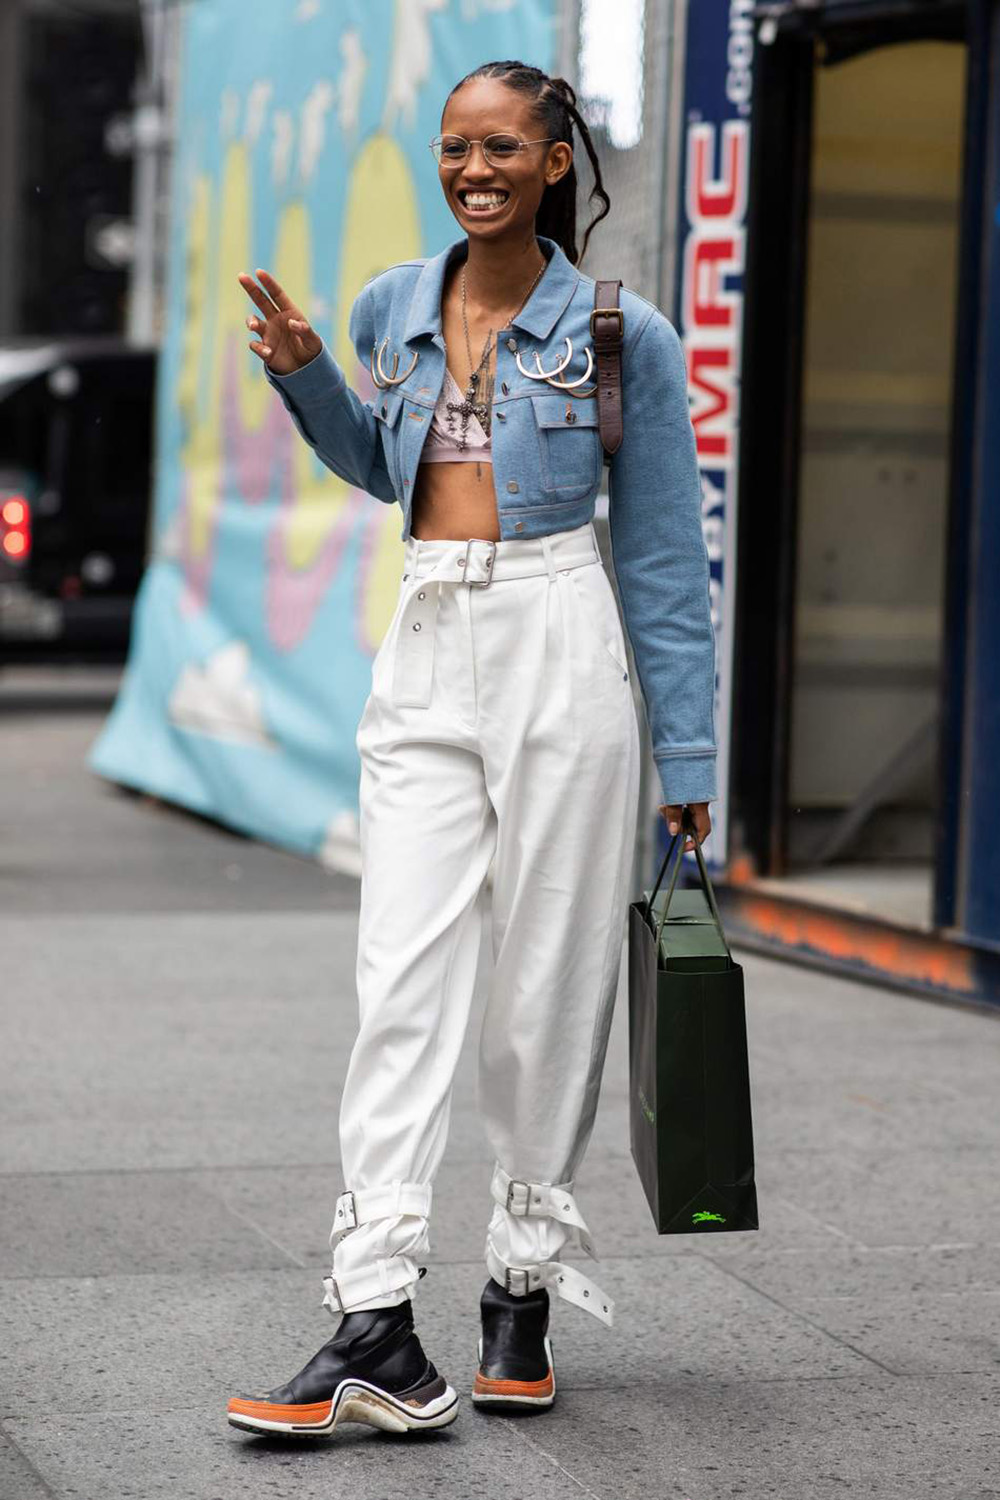 Precious Cargo: The practical pant trend that’s replacing your mom jeans (and fast) |